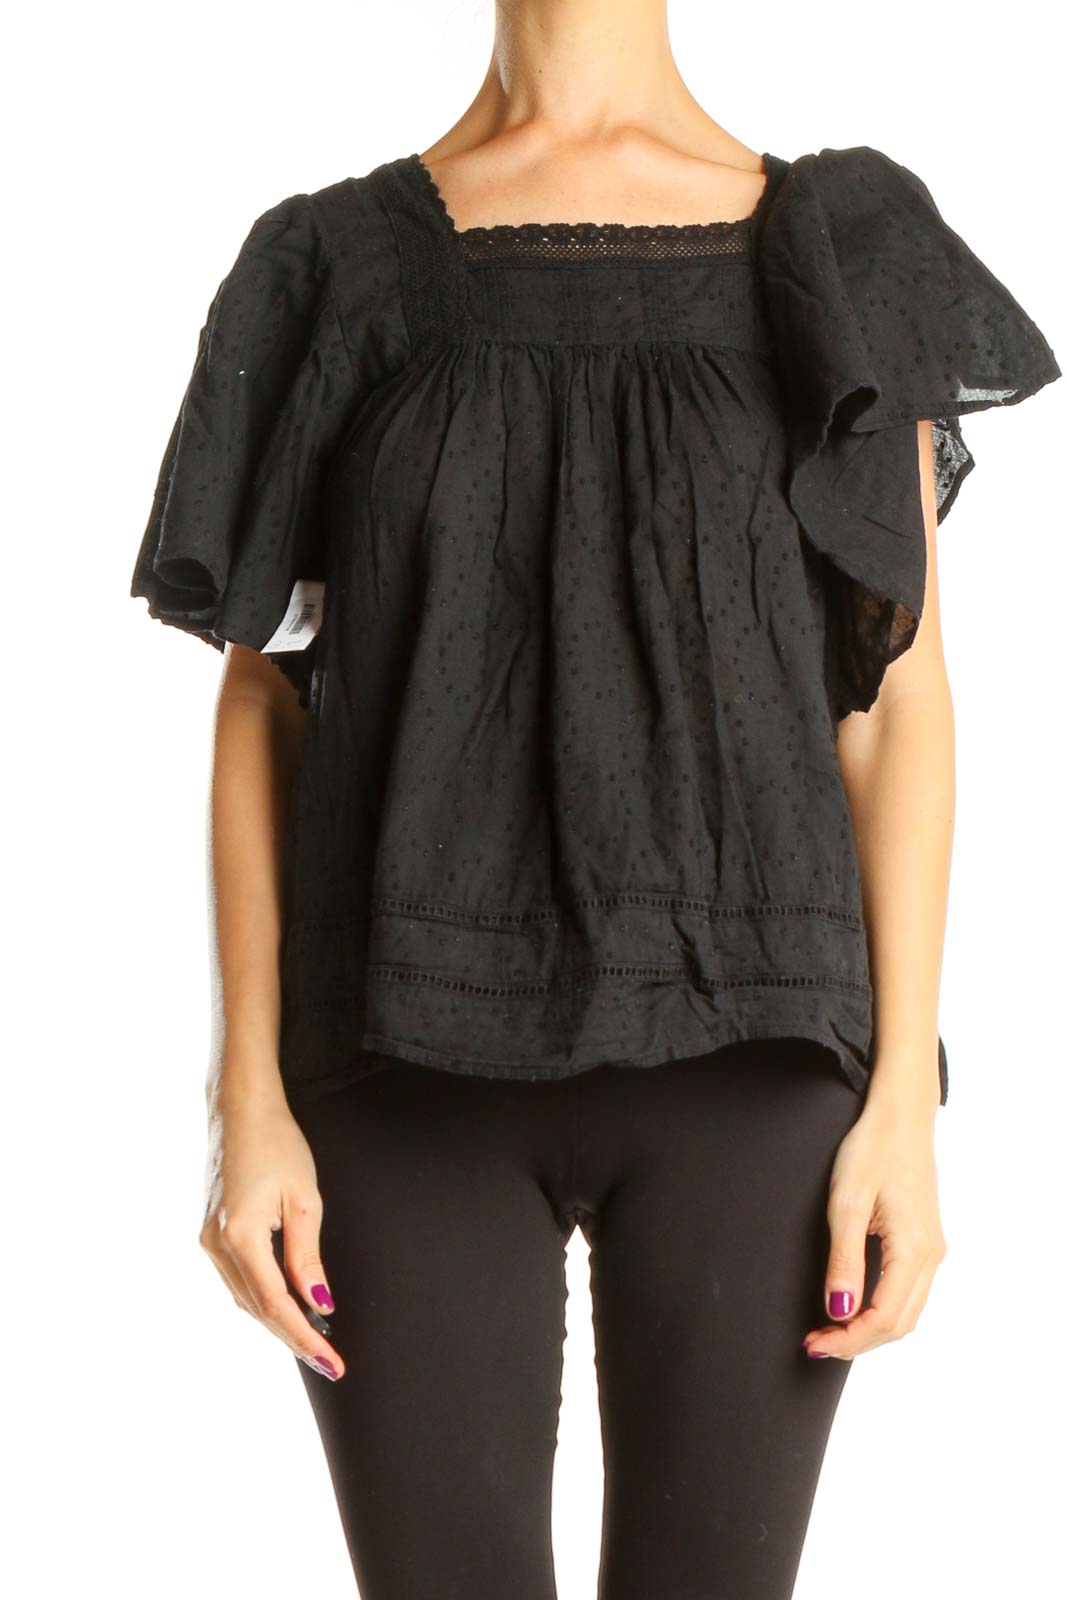 Black Chic Eyelet Lace Top Front